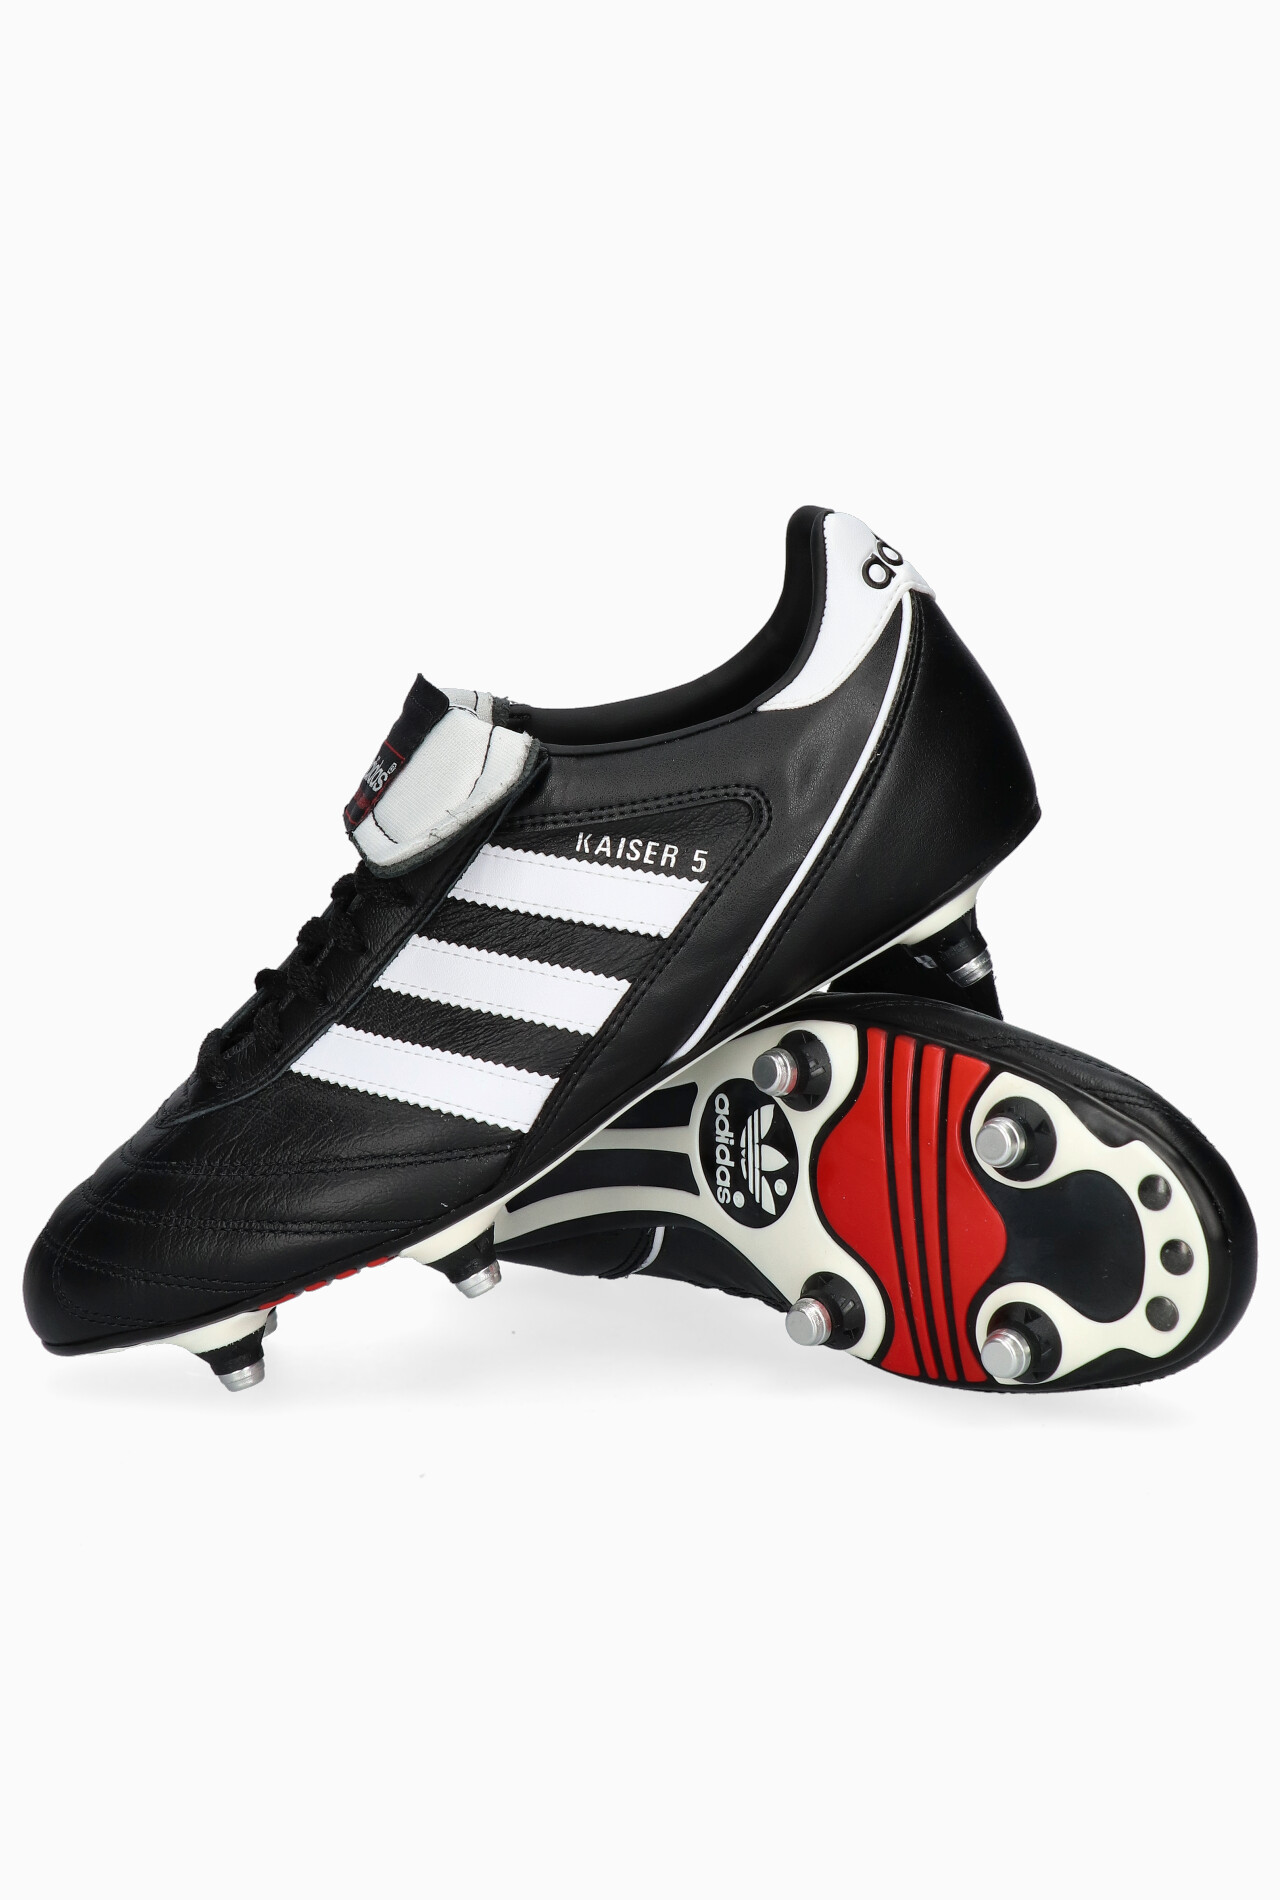 Perpetuo Moral Influencia Cleats adidas Kaiser 5 Cup | R-GOL.com - Football boots & equipment